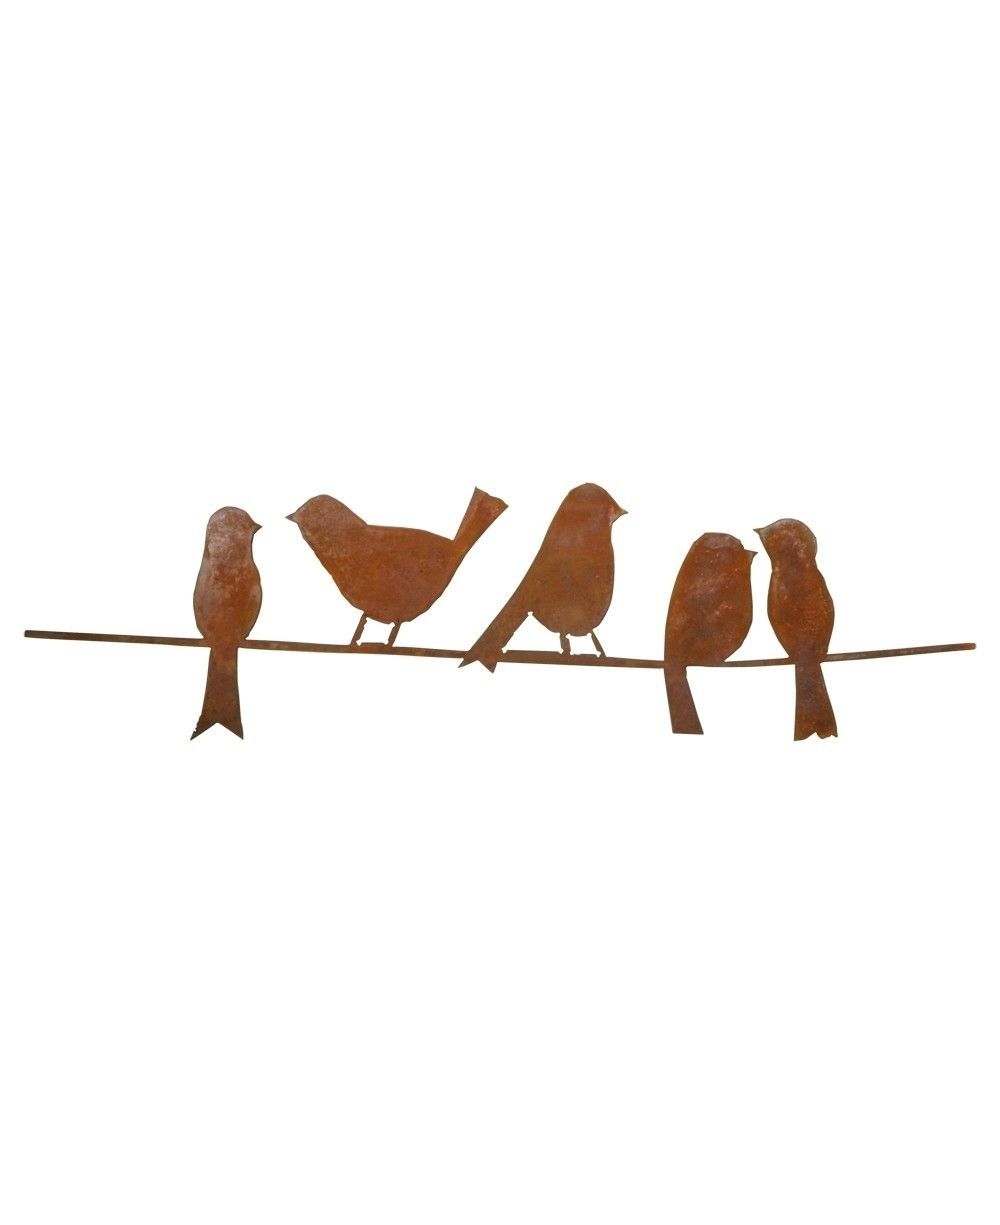 Astonishing Birds On A Wire Wall Art 34 About Remodel Sensual Wall With Birds On A Wire Wall Art (View 15 of 20)